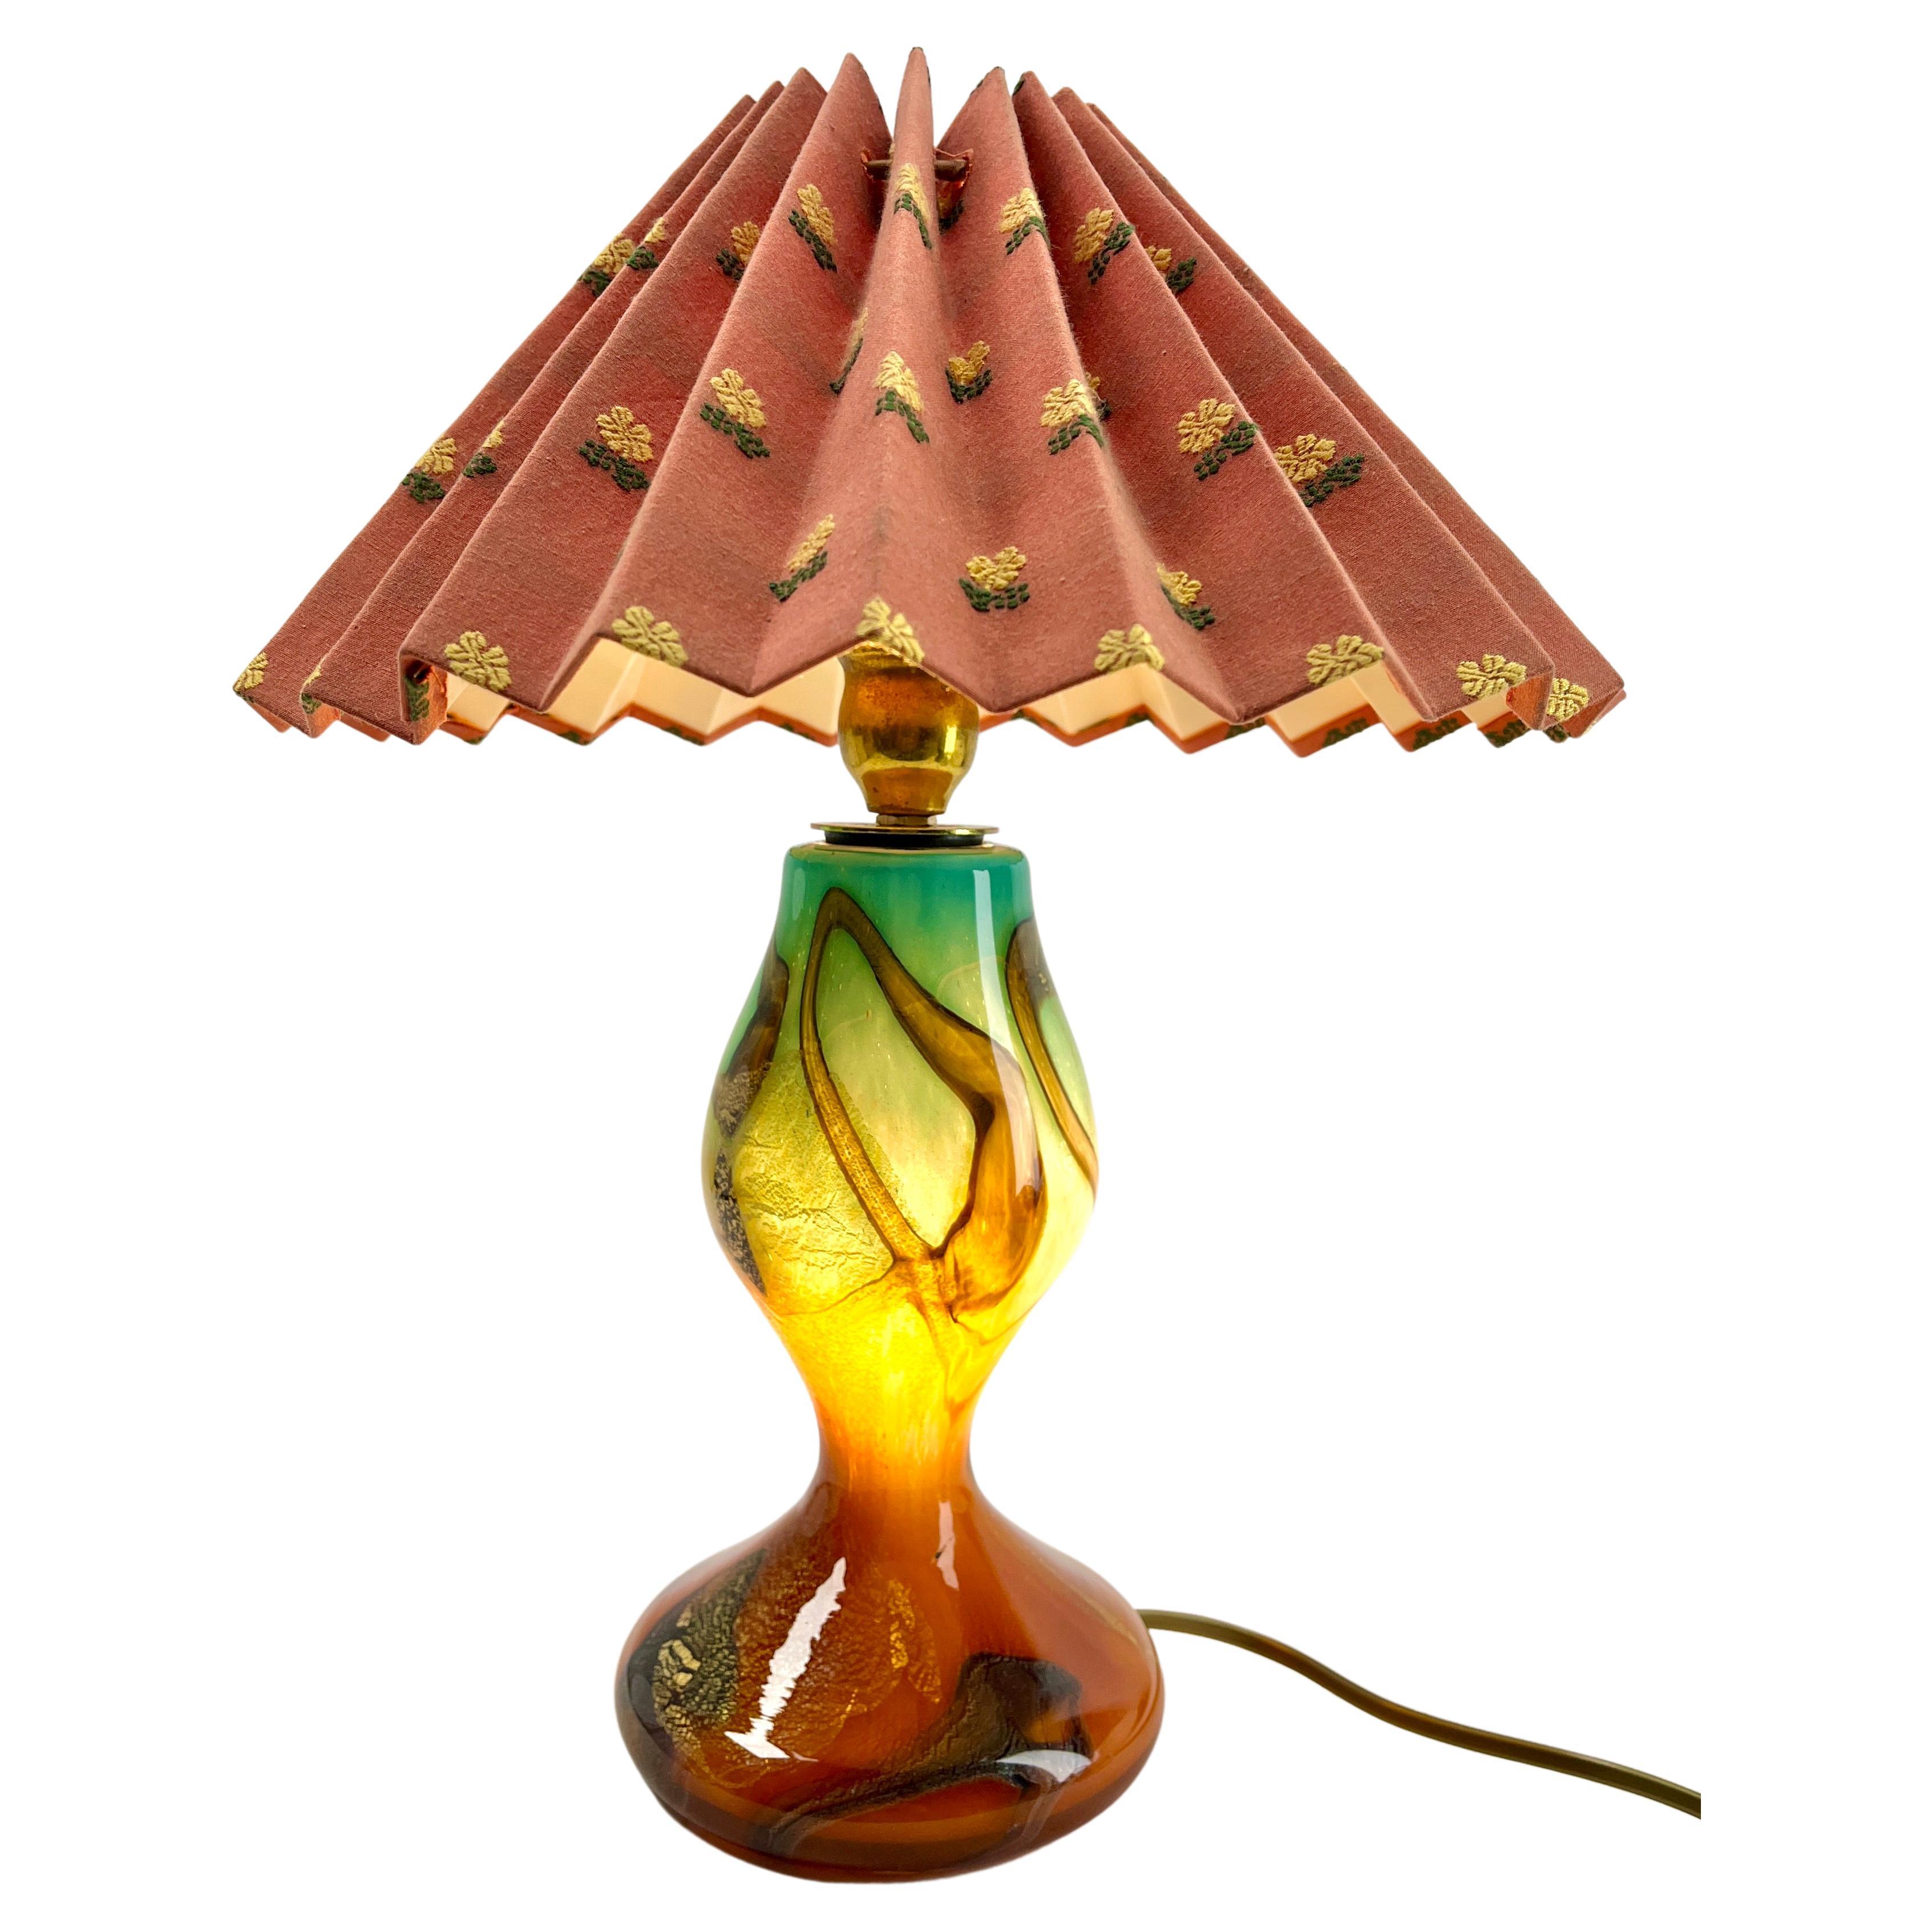 Murano Table Lamp With colored blown glass and Gold Flecks details.